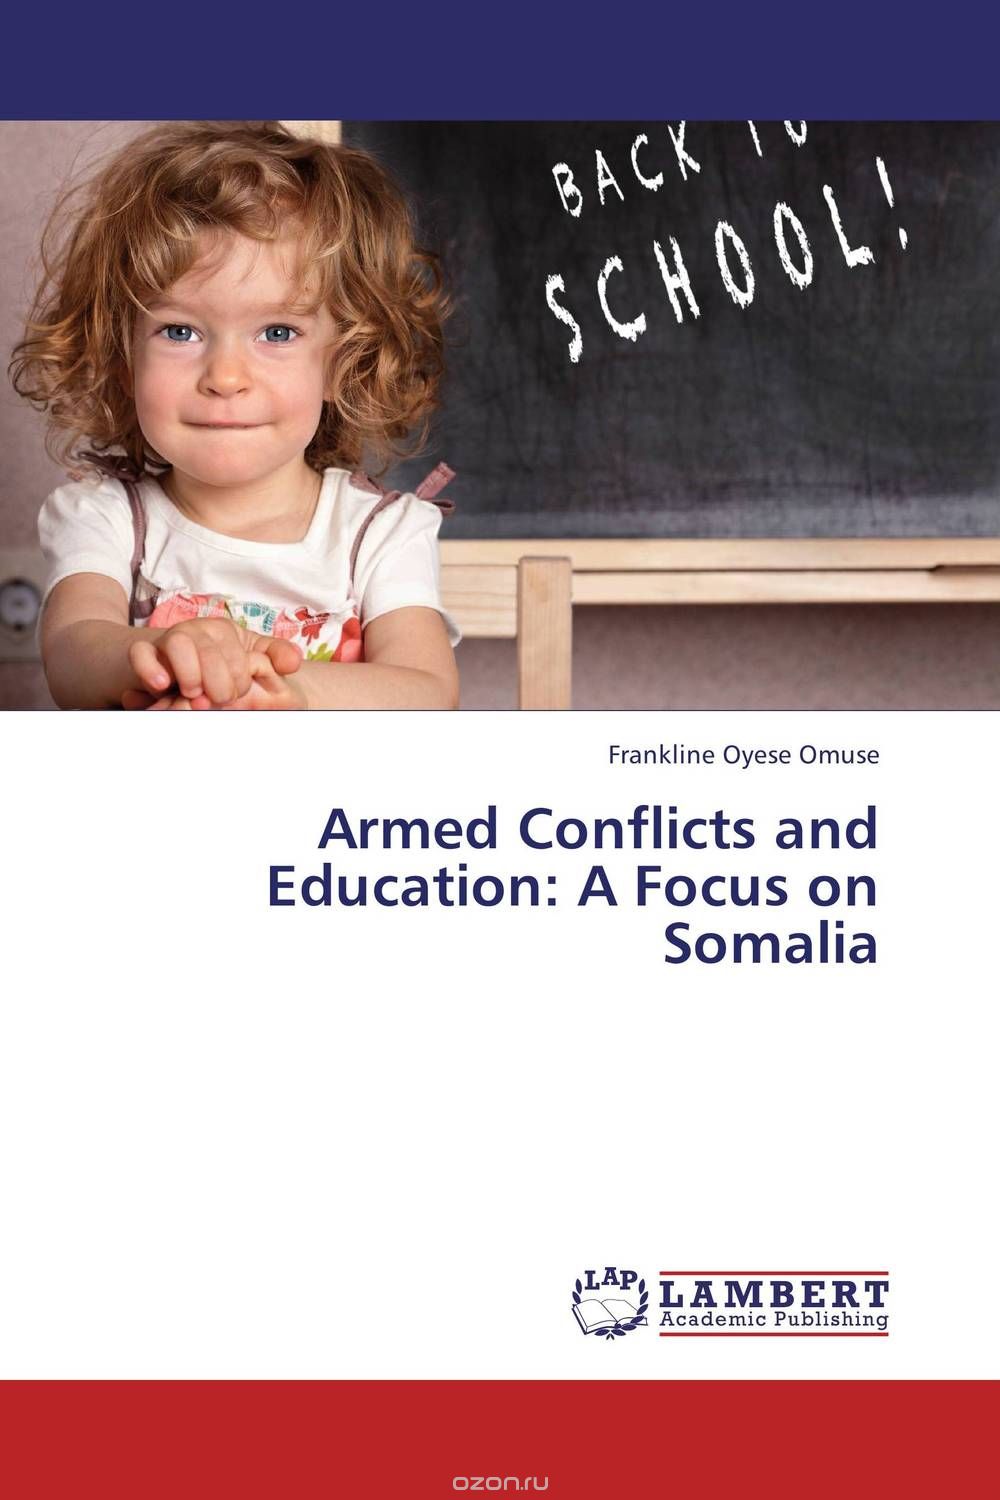 Armed Conflicts and Education: A Focus on Somalia